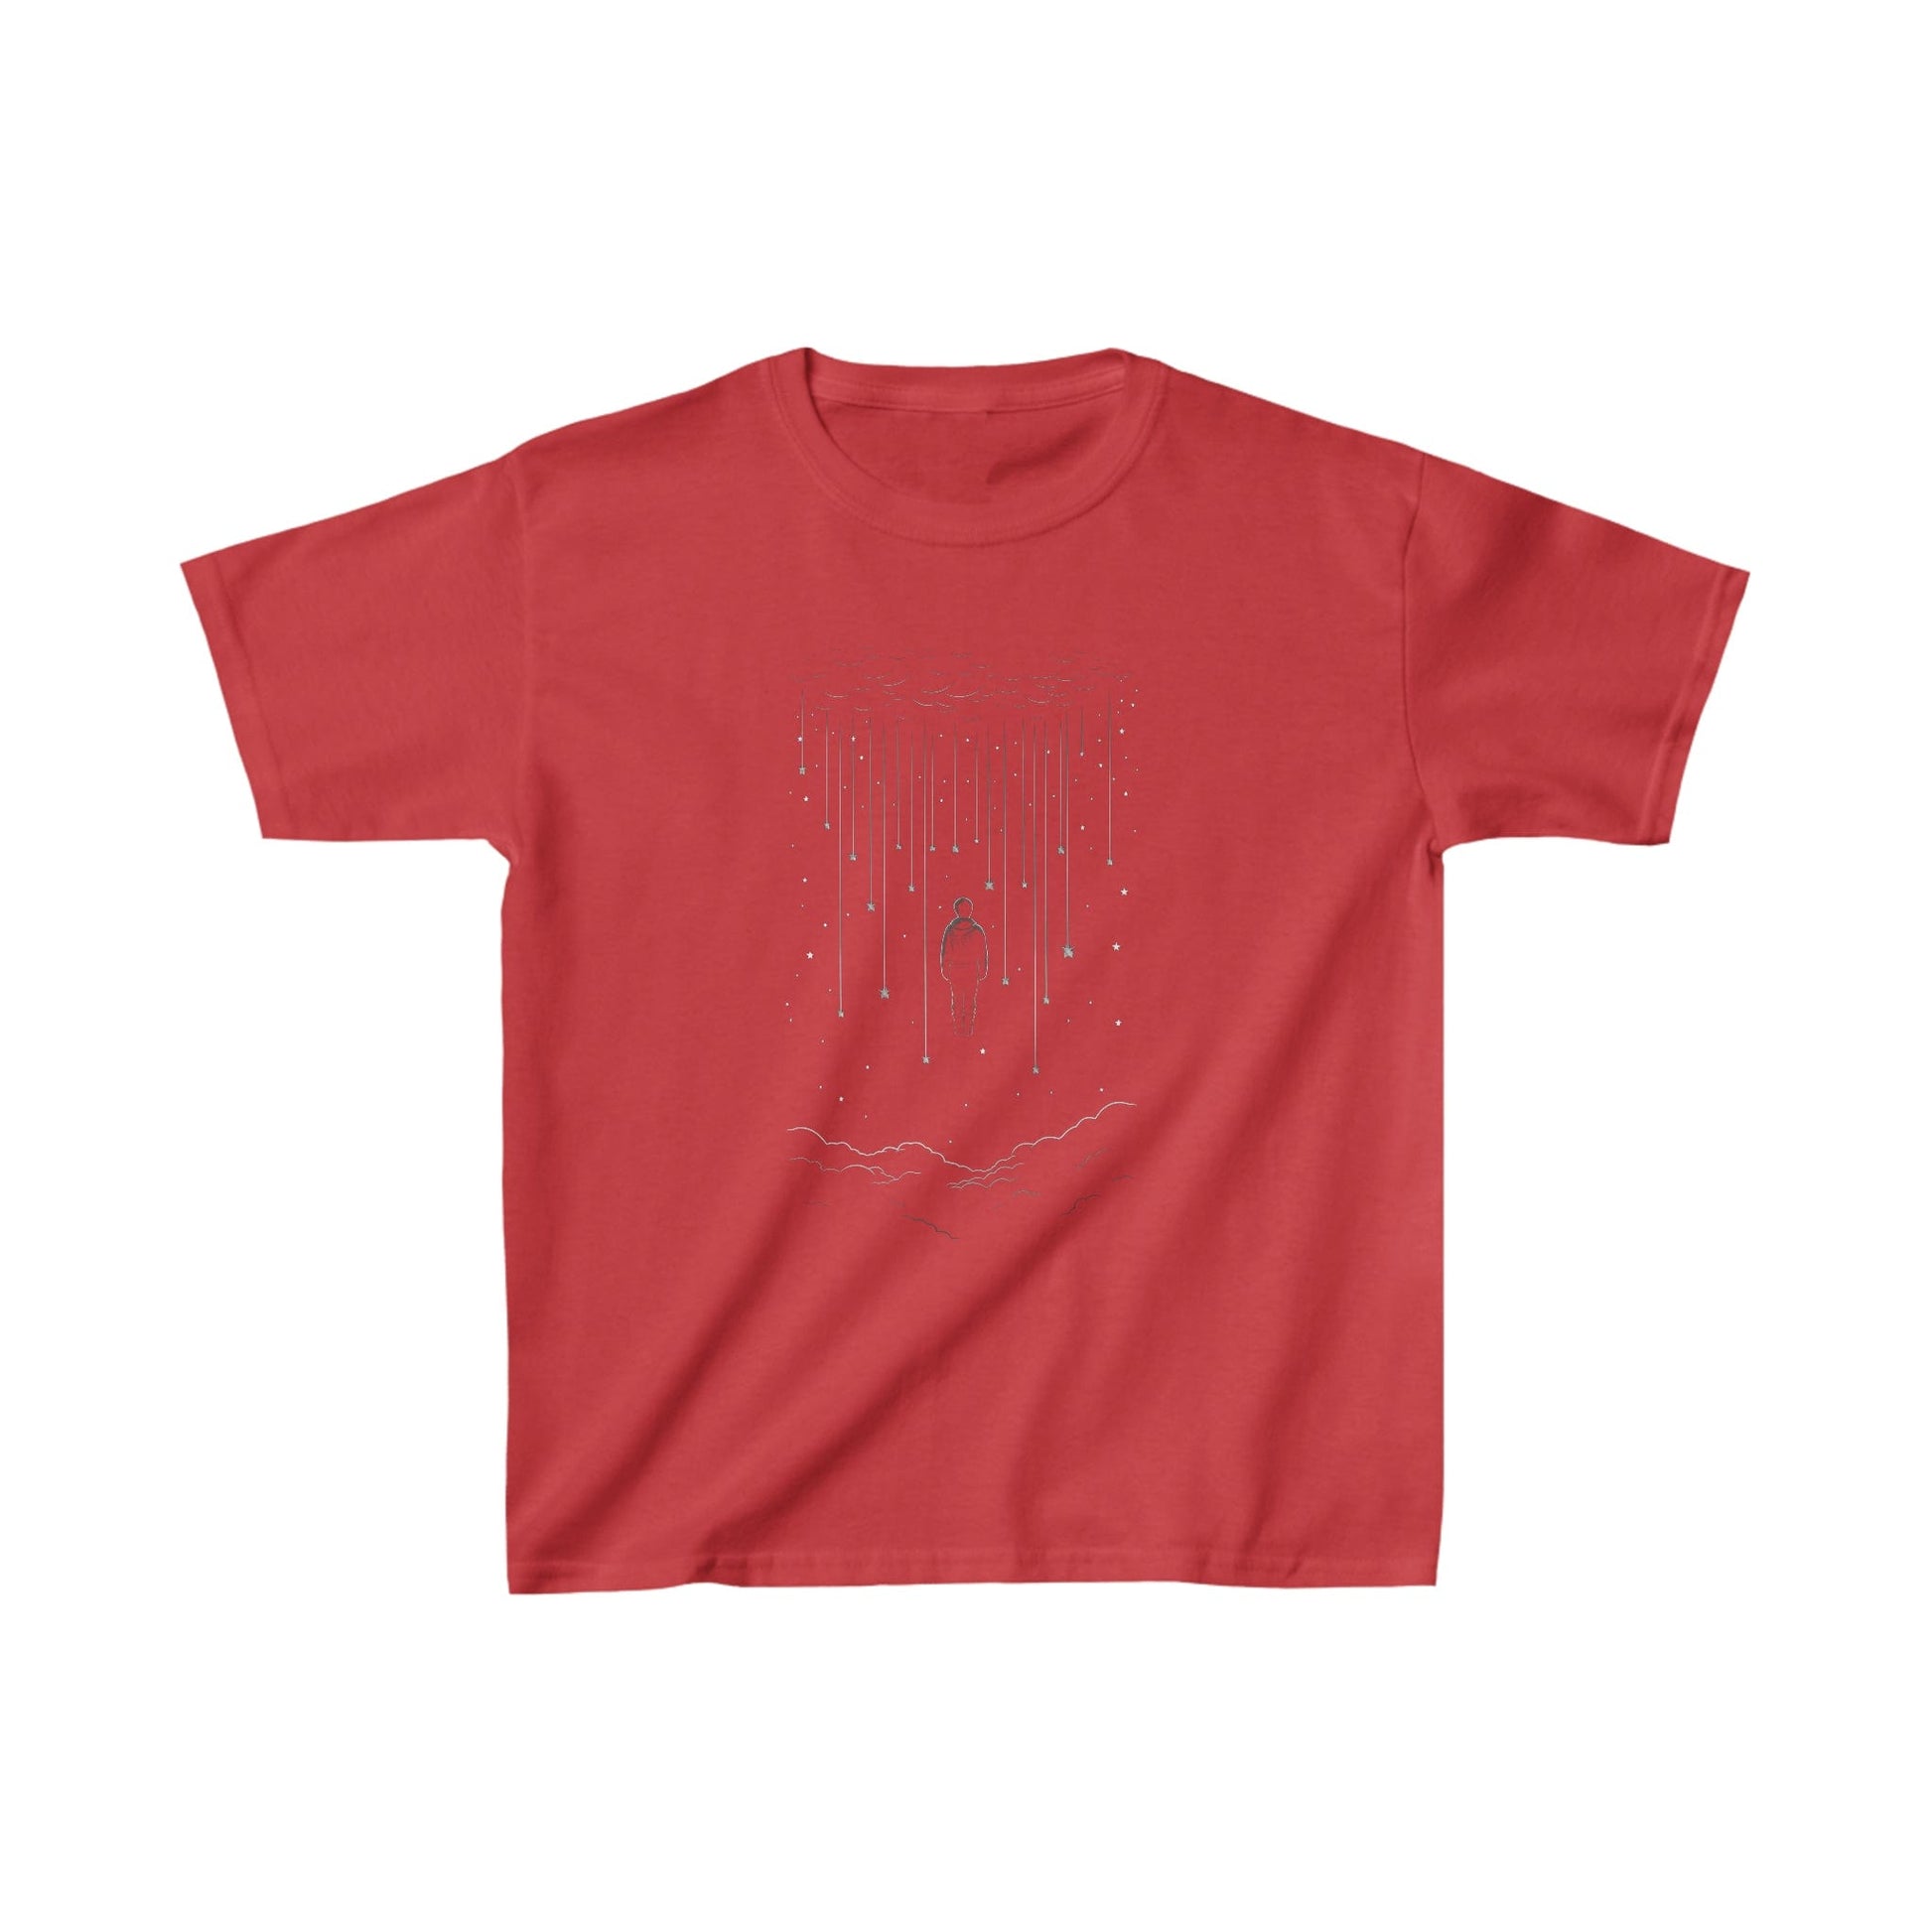 Kids clothes XS / Red Youth Falling Stars T-Shirt